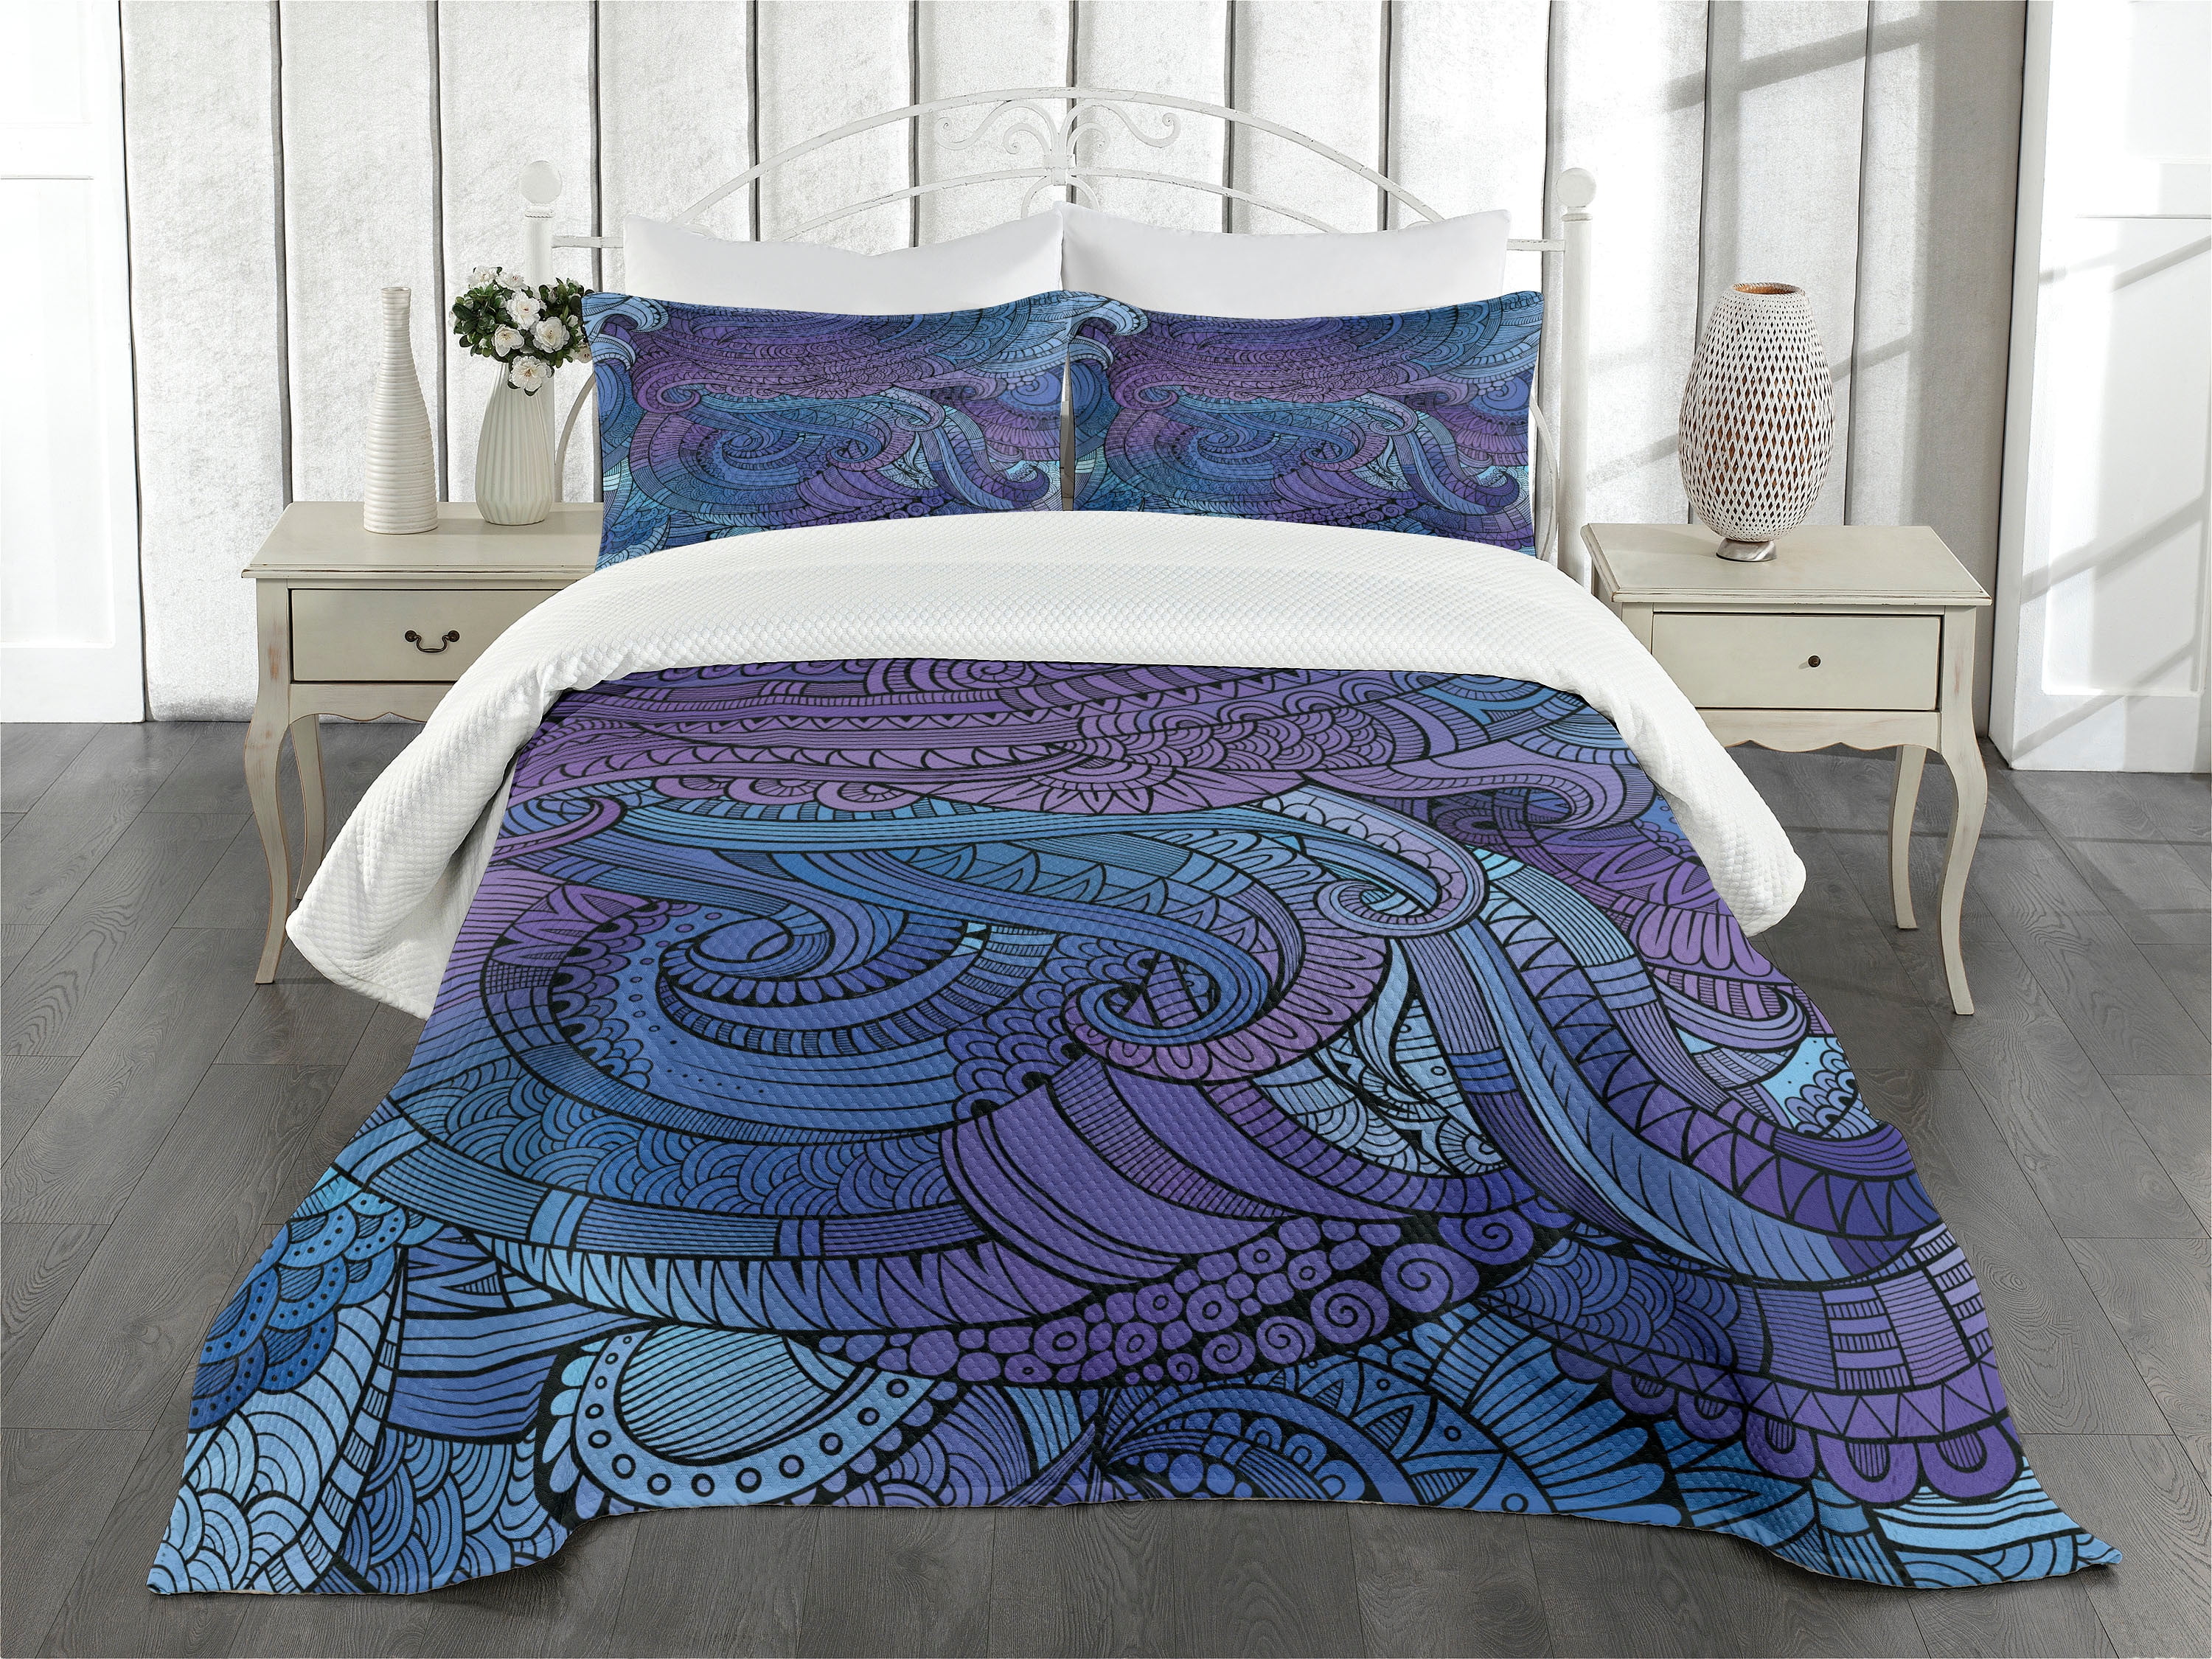 Abstract Bedspread Set King Size, Ocean Inspired Graphic Arabesque Paisley  Swirled Hand Drawn Ethnic Artwork Print, Quilted Piece Decor Coverlet Set  with Pillow Shams, Purple Blue, by Ambesonne